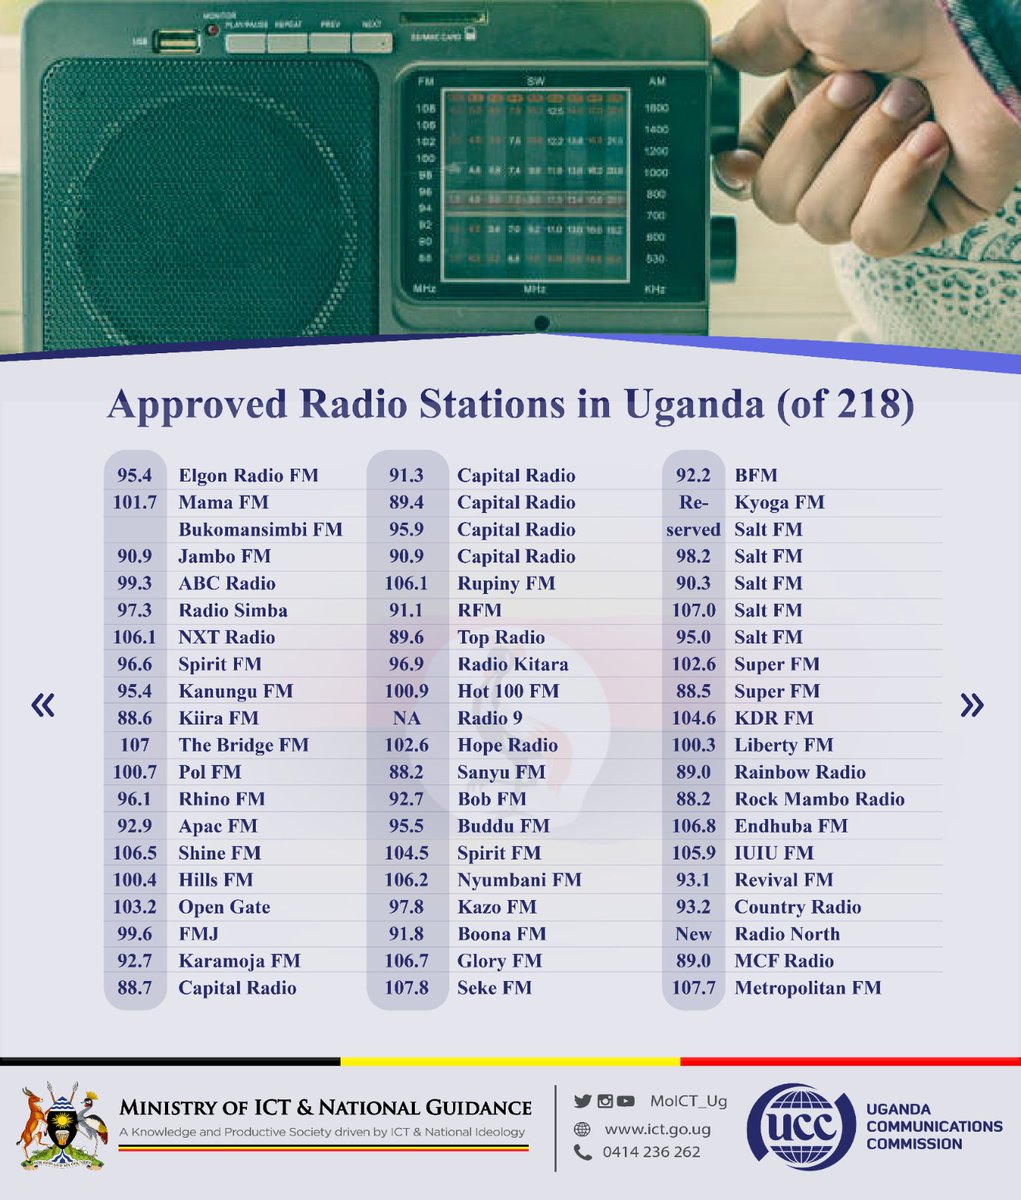 In Uganda, greater relevance to small businesses was achieved through the use of local languages on radios that are responsive to people’s issues& interests

Over 200 radio FM stations are registered in Uganda & are operational @UCC_Official #ICTWorksUg
#WorldTelecommunicationDay